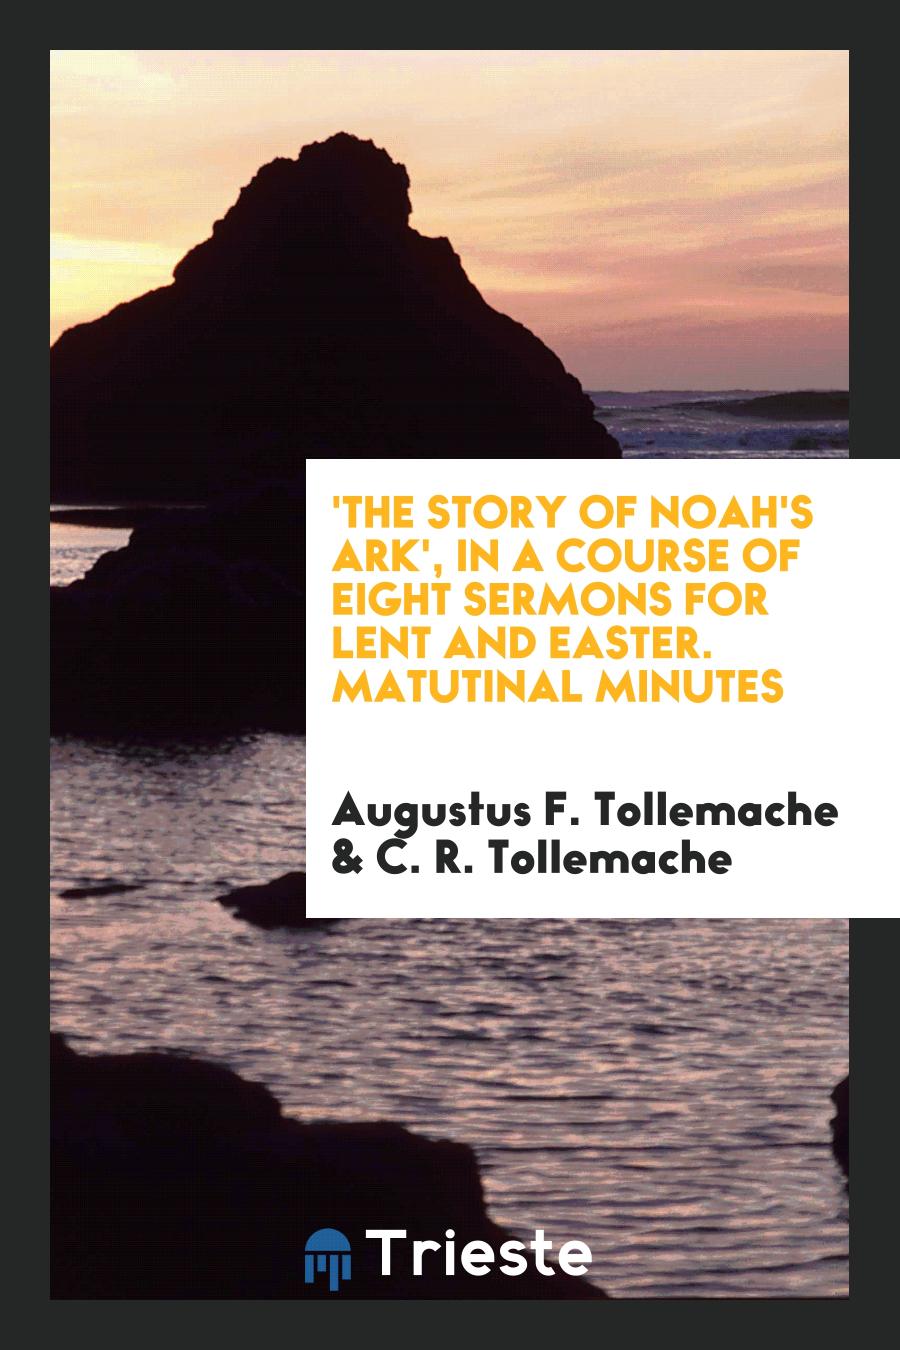 'The Story of Noah's ark', in a Course of Eight Sermons for Lent and Easter. Matutinal Minutes